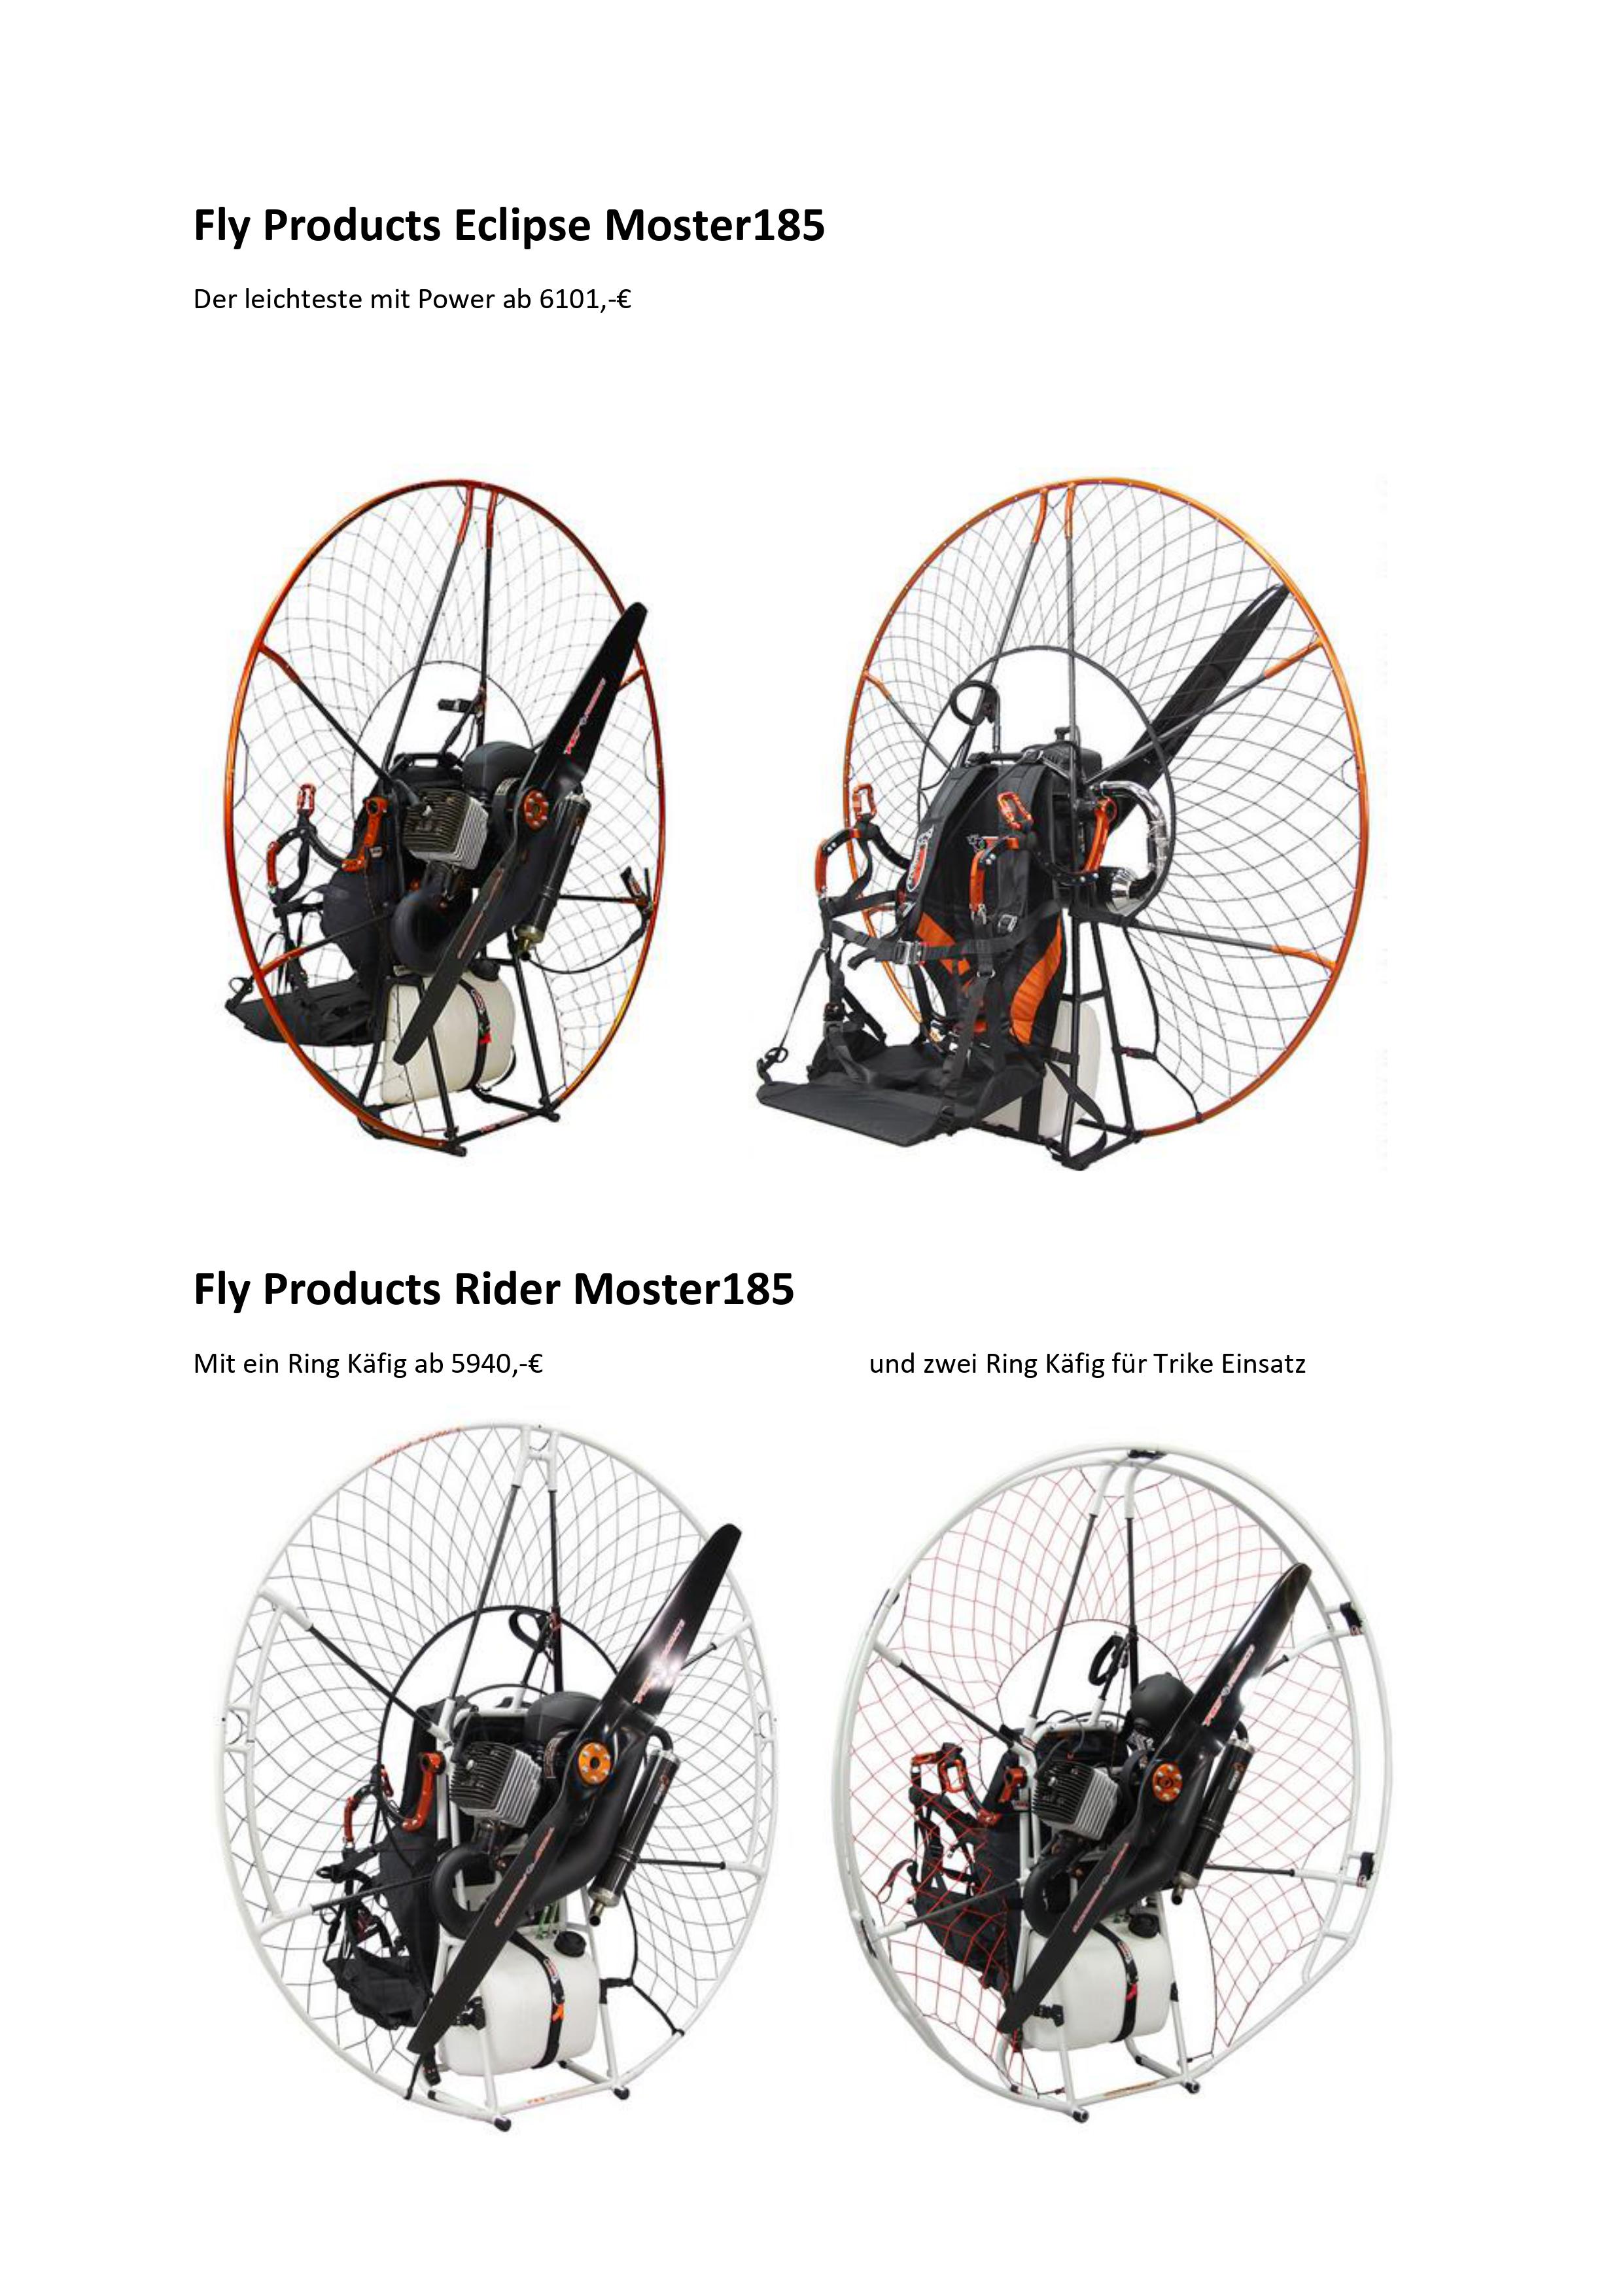 Fly Products Eclipse Moster 185 Jpeg